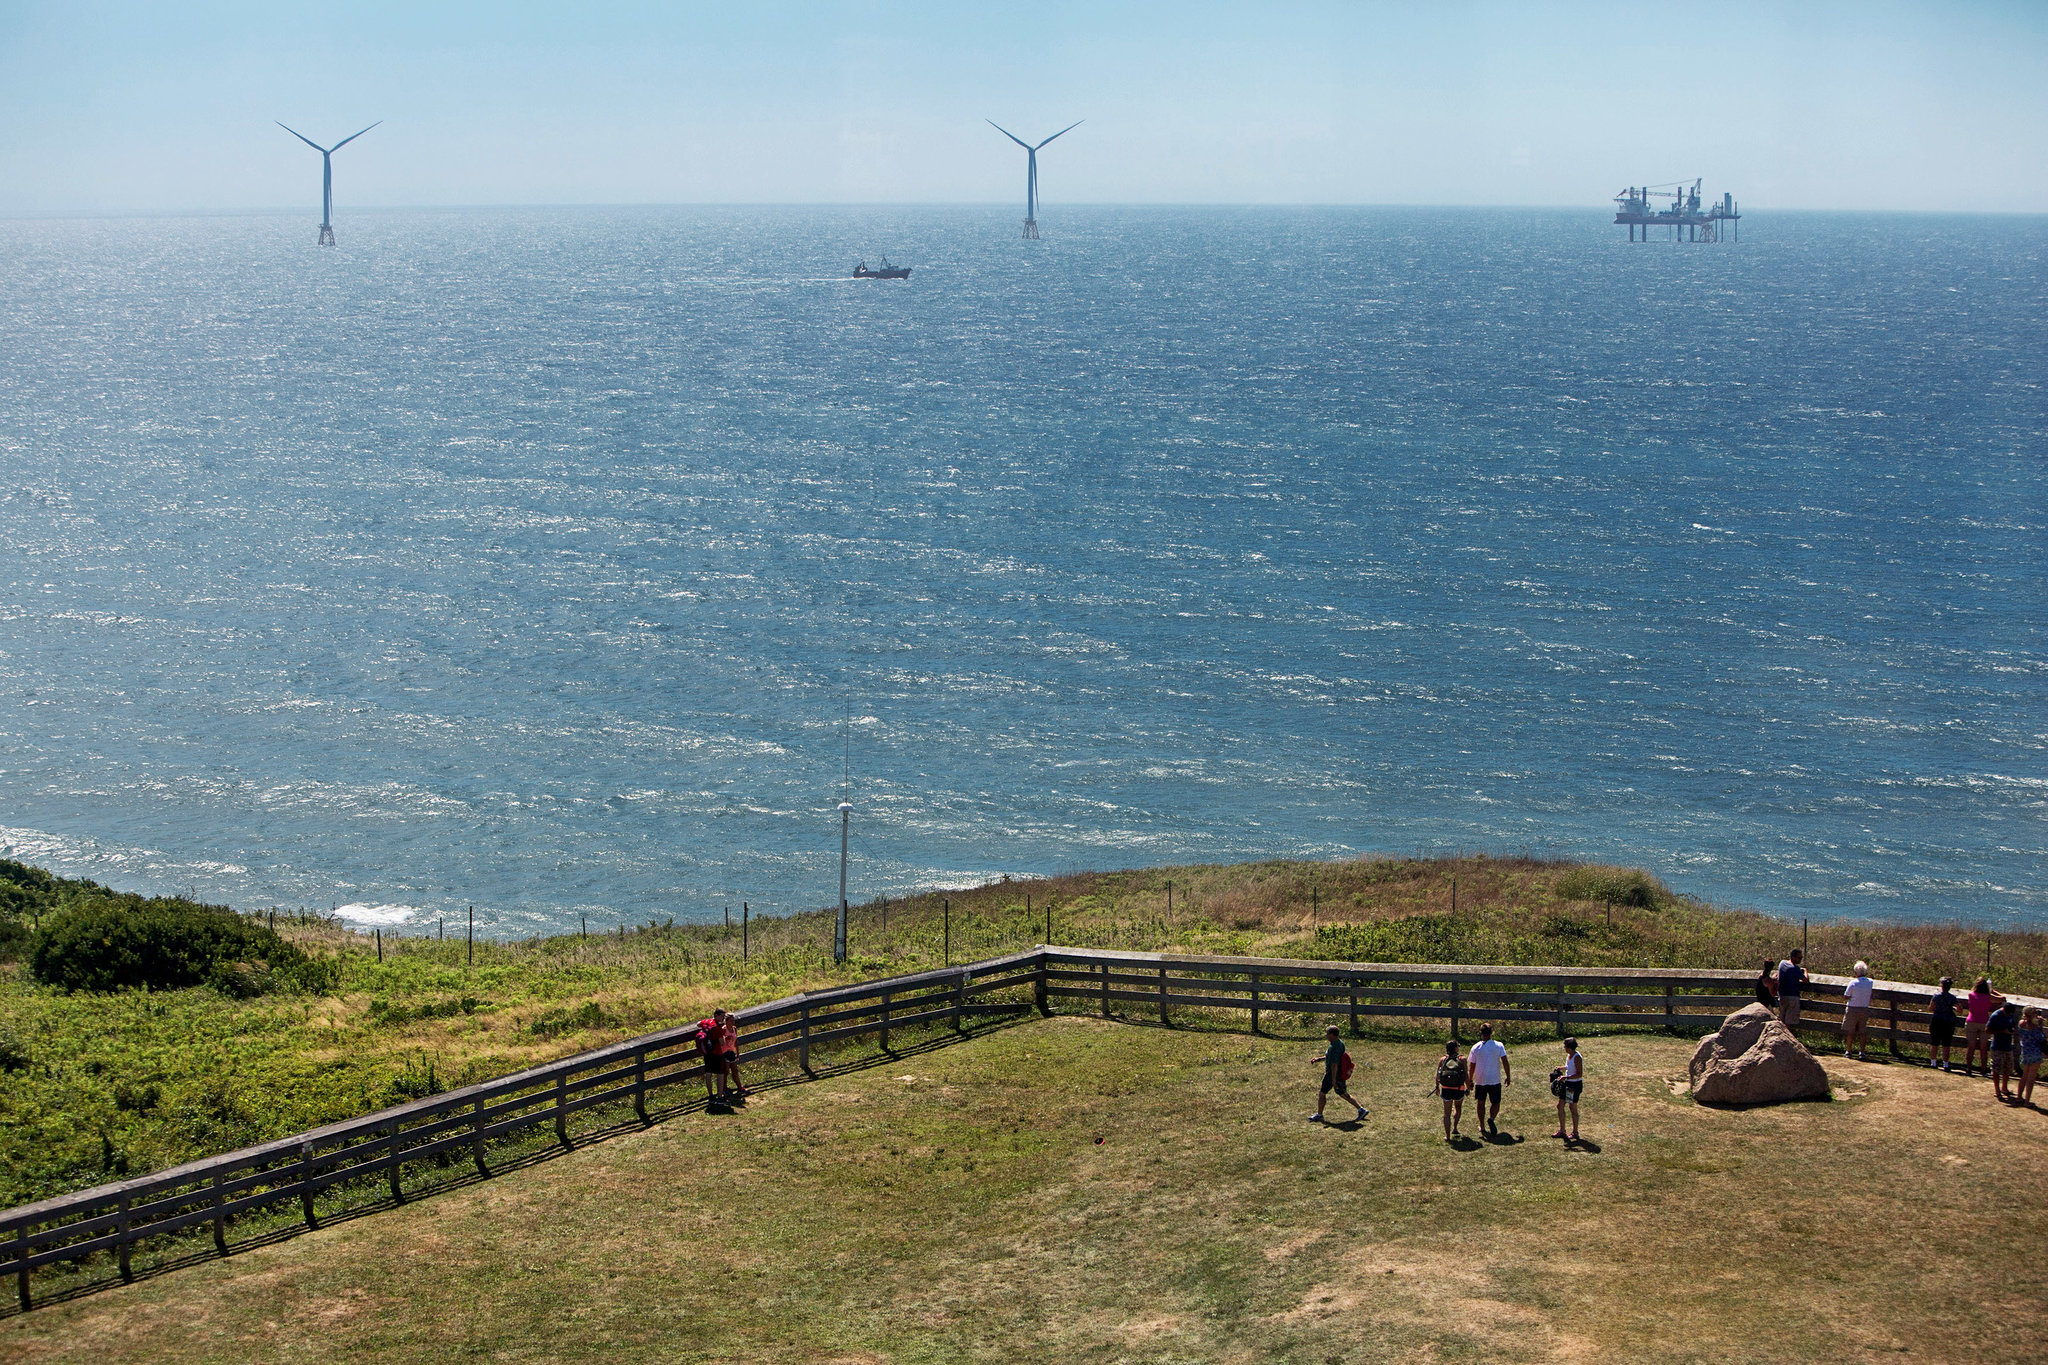 America’s First Offshore Wind Farm May Power Up a New Industry - Renewable Energy - eTown